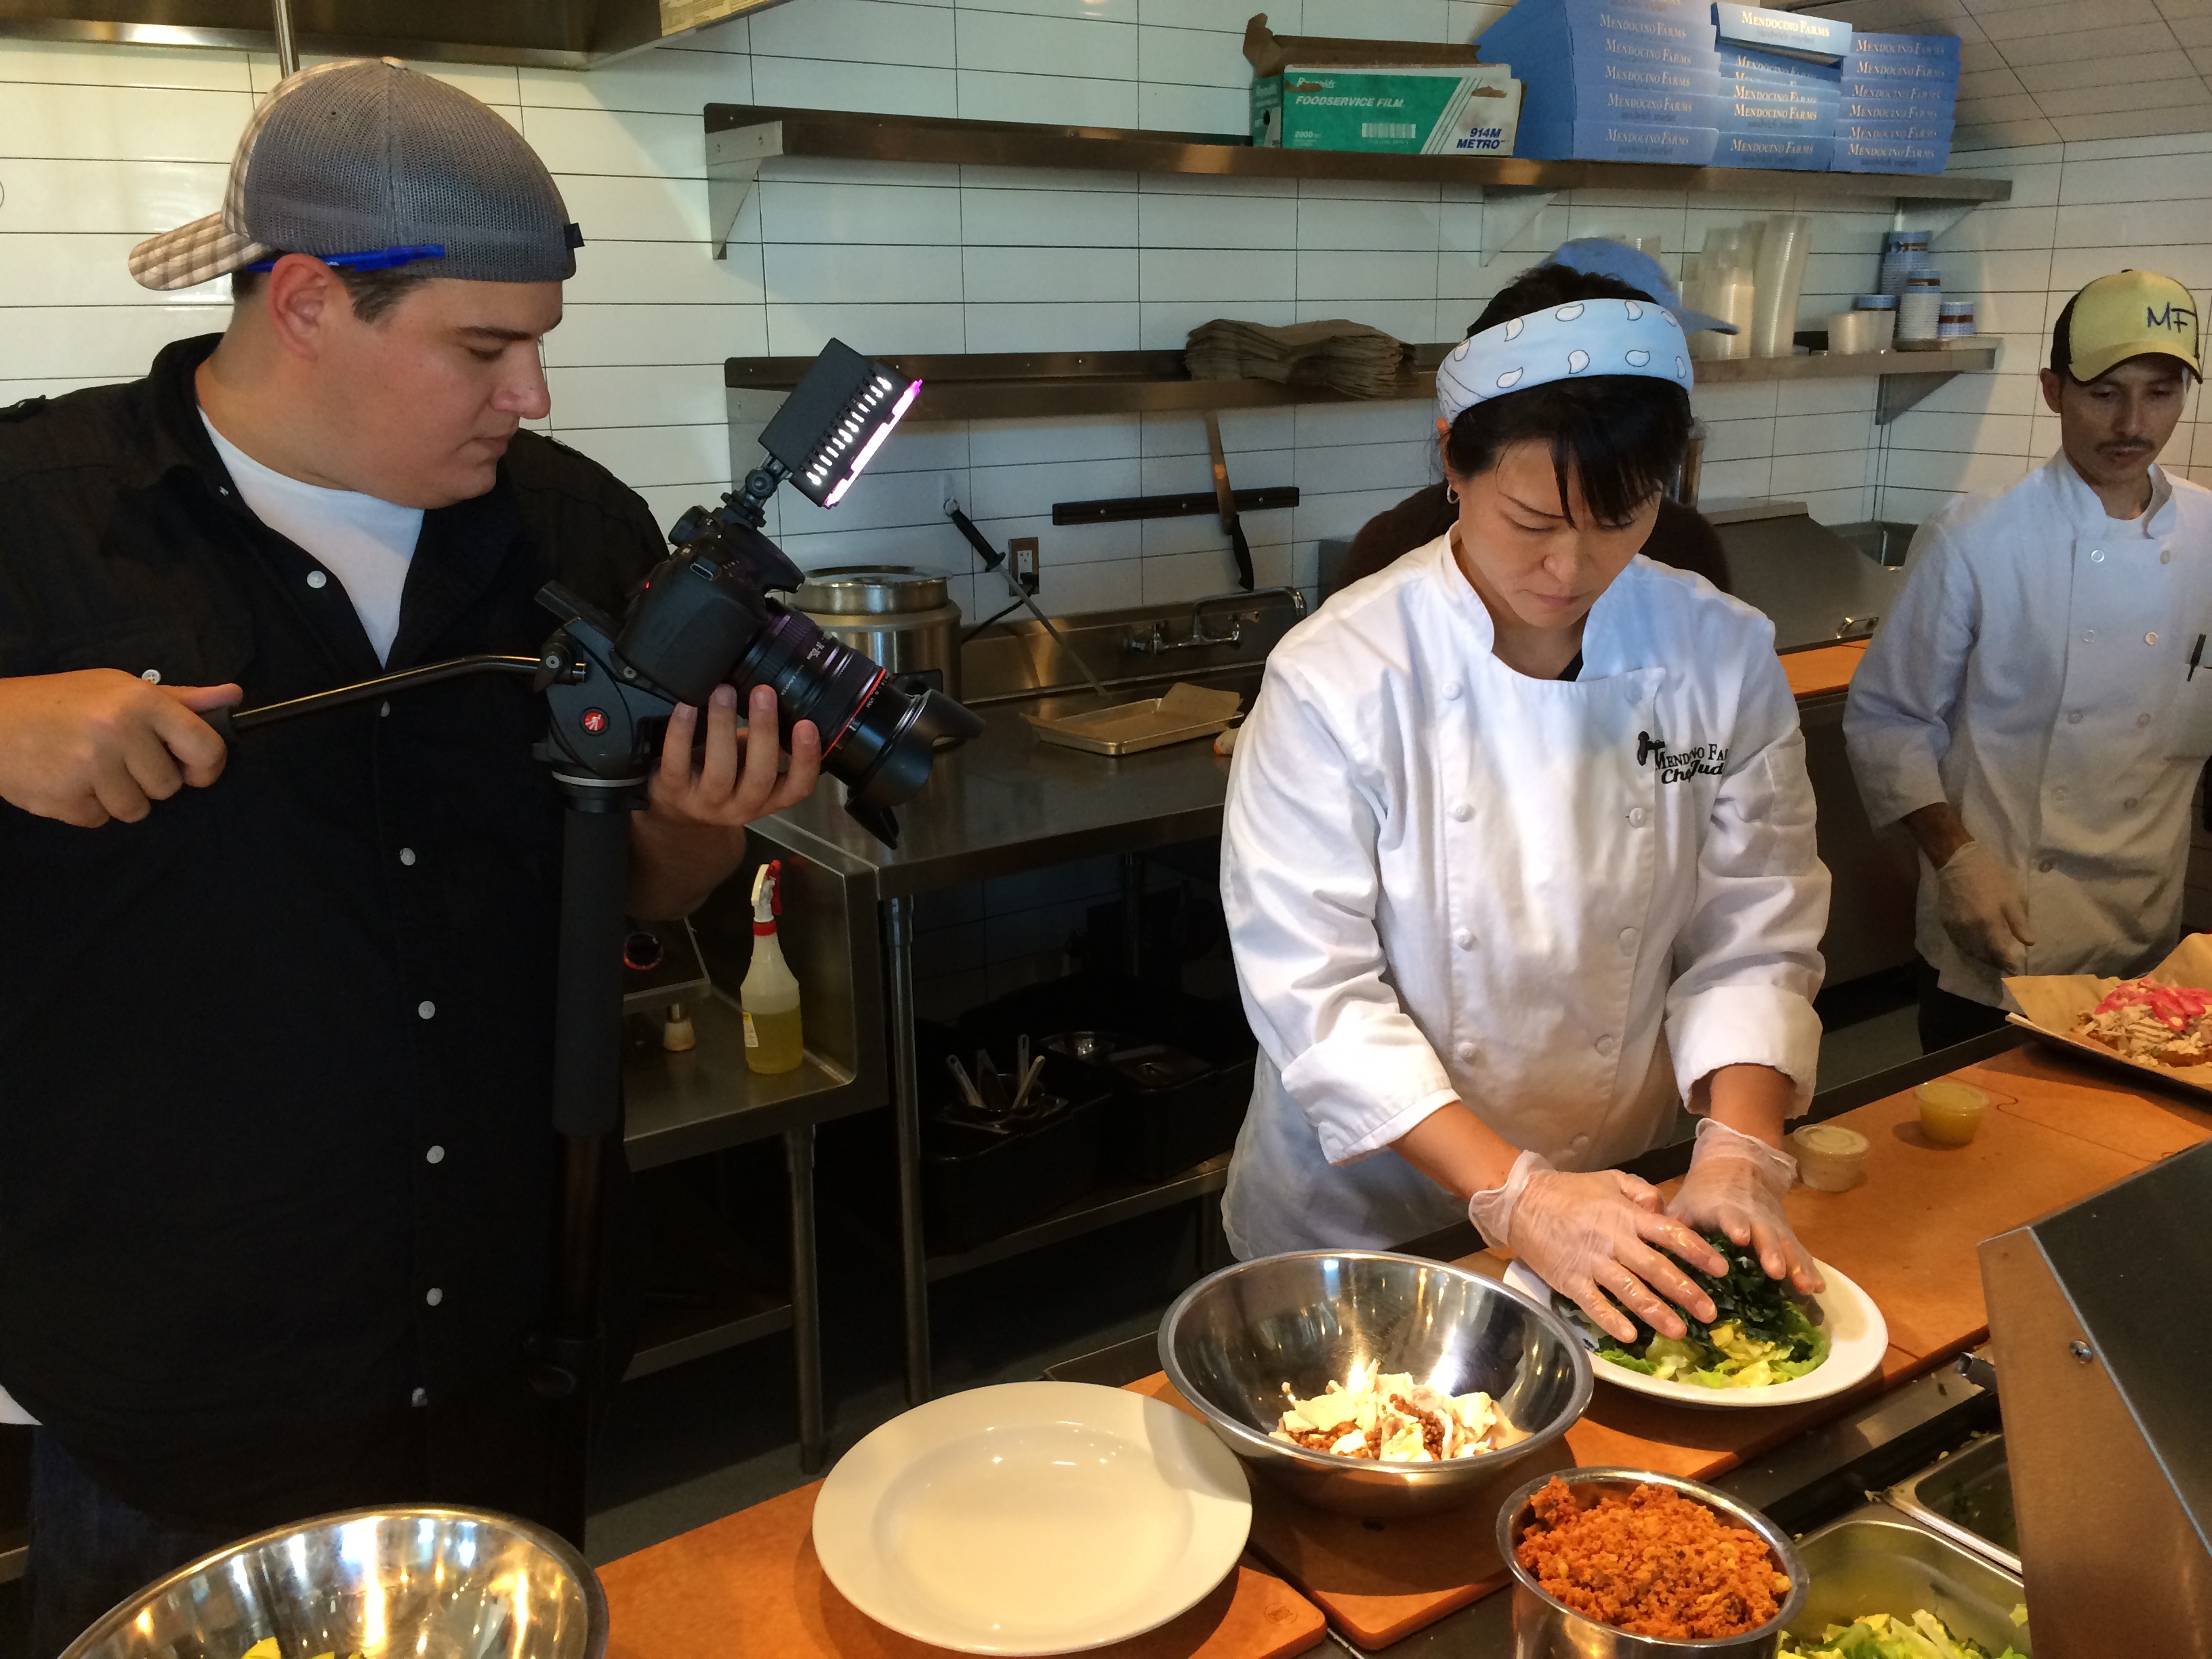 My film crew in action, filming Fast Casual Nation our documentary on the Fast Casual Restaurant business